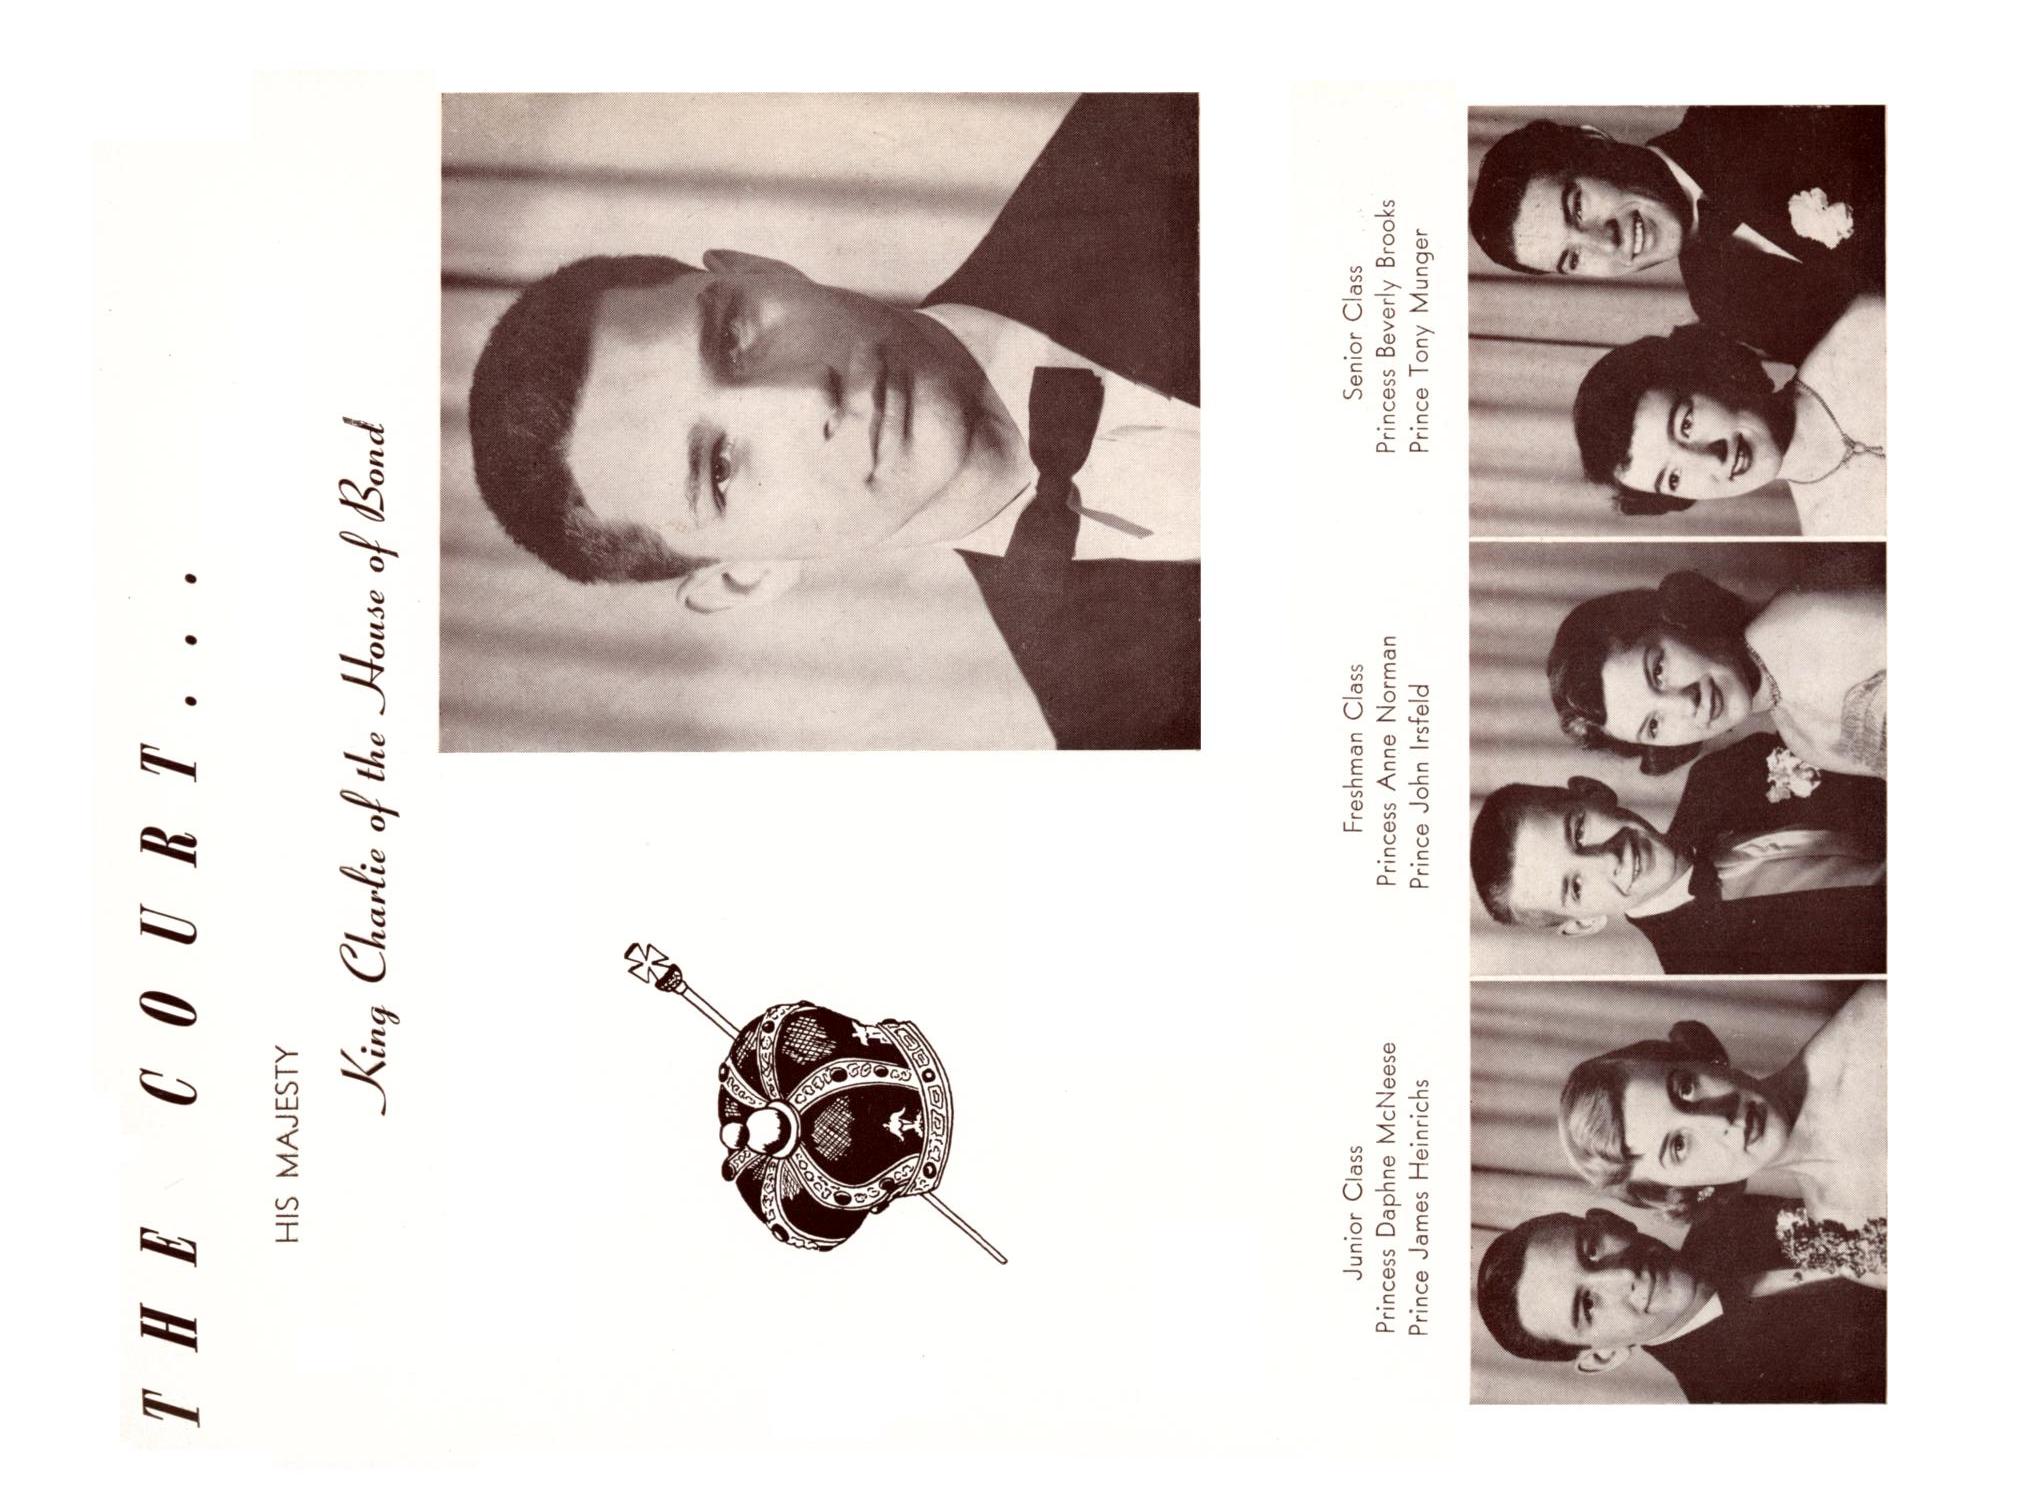 The Burro, Yearbook of Mineral Wells High School, 1953
                                                
                                                    49
                                                